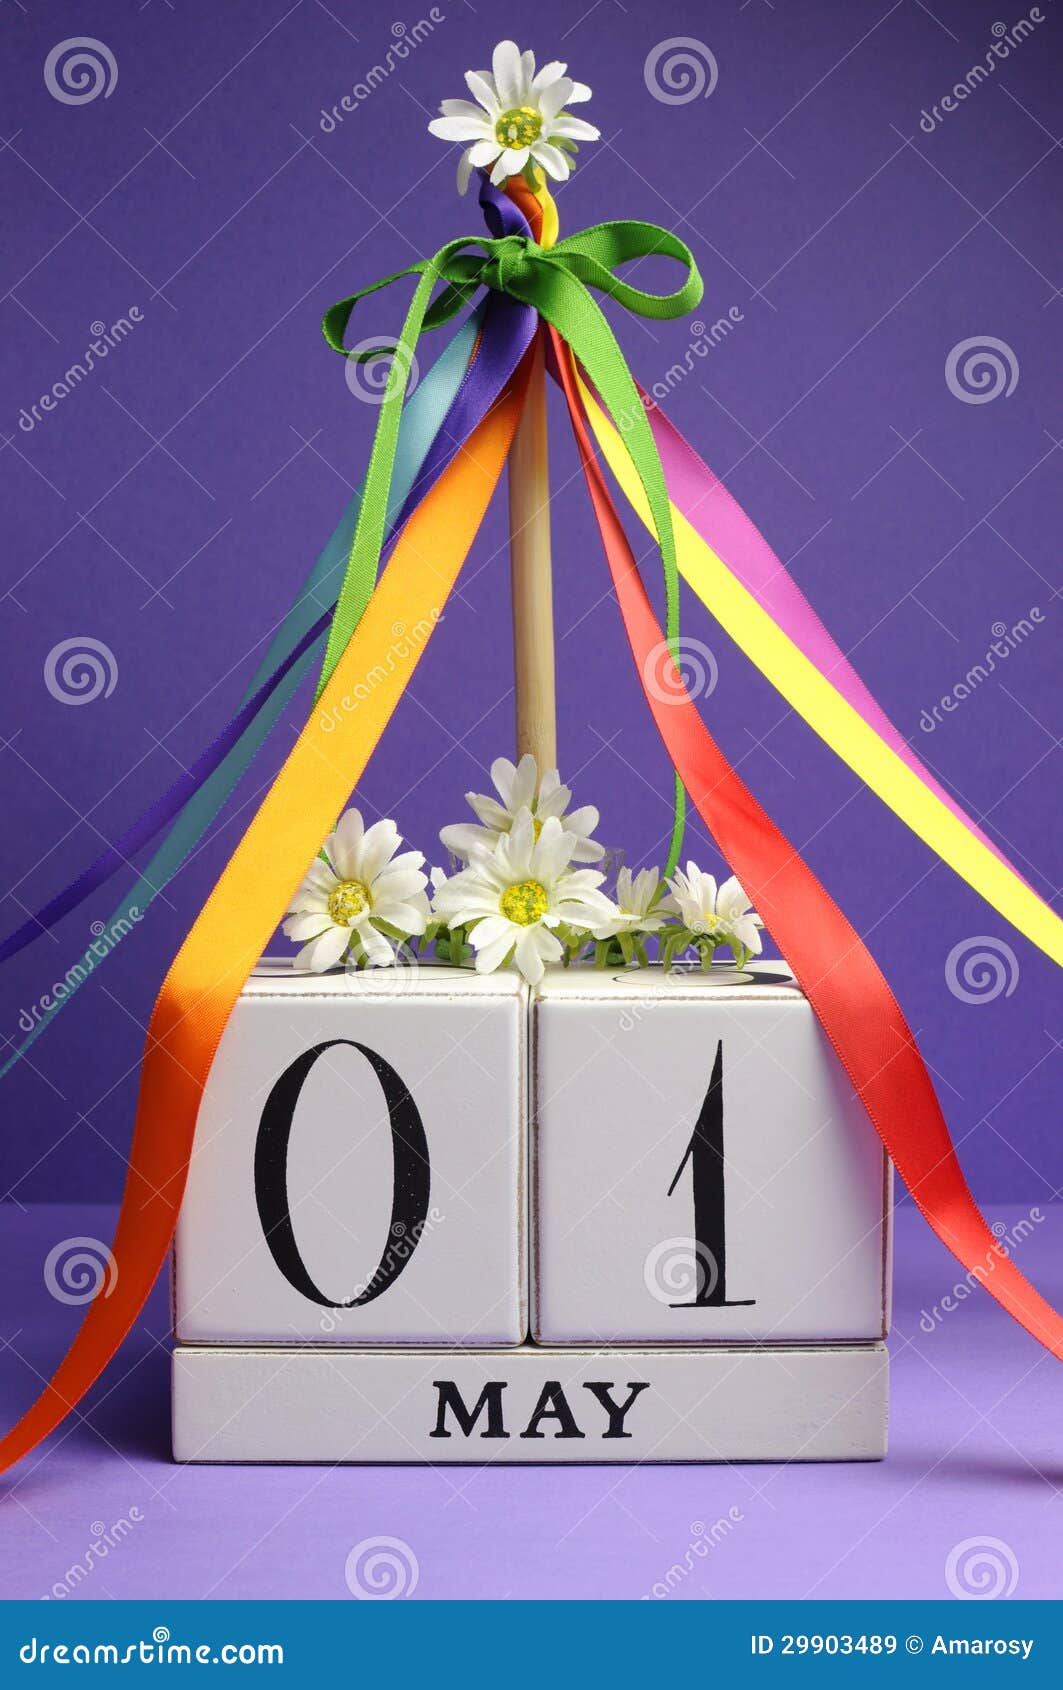 may day, may 1, calendar with maypole and multi color ribbons